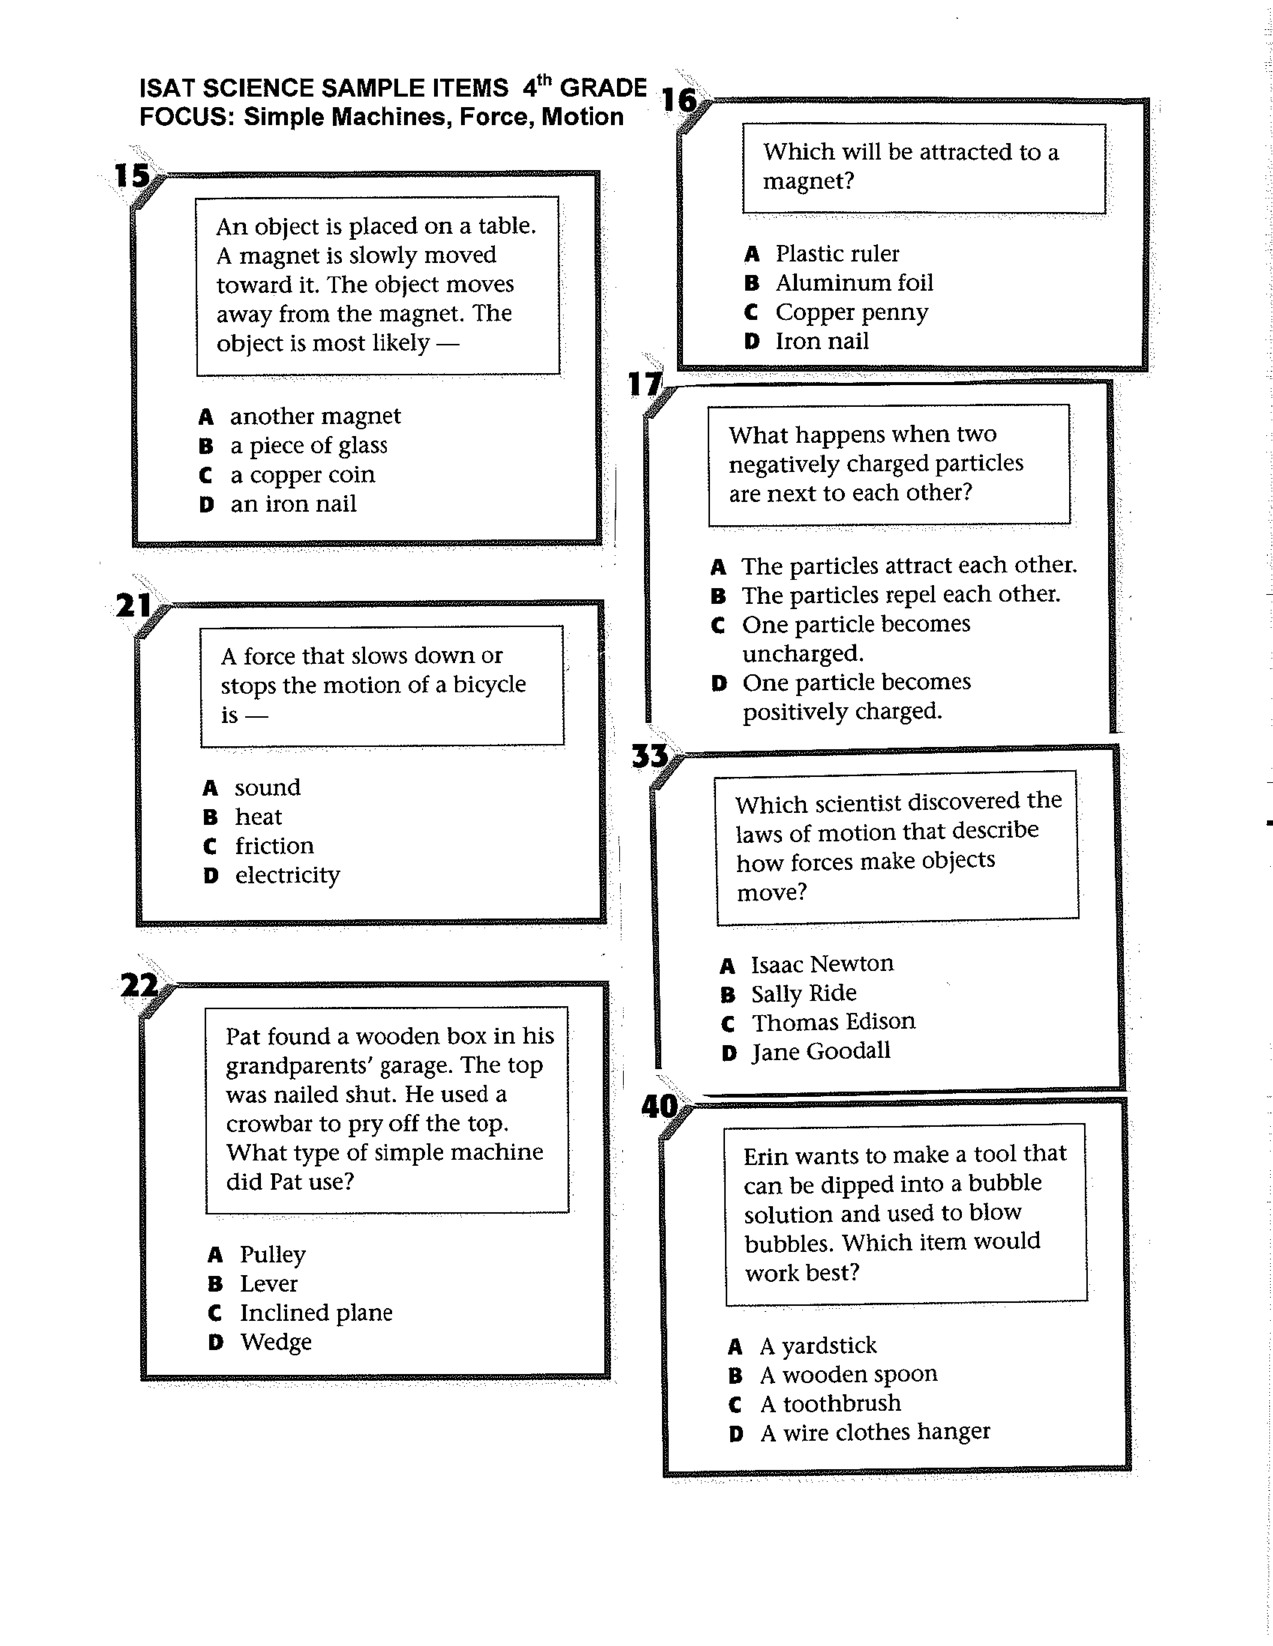 4th Grade Science Worksheets Simple Machines Image